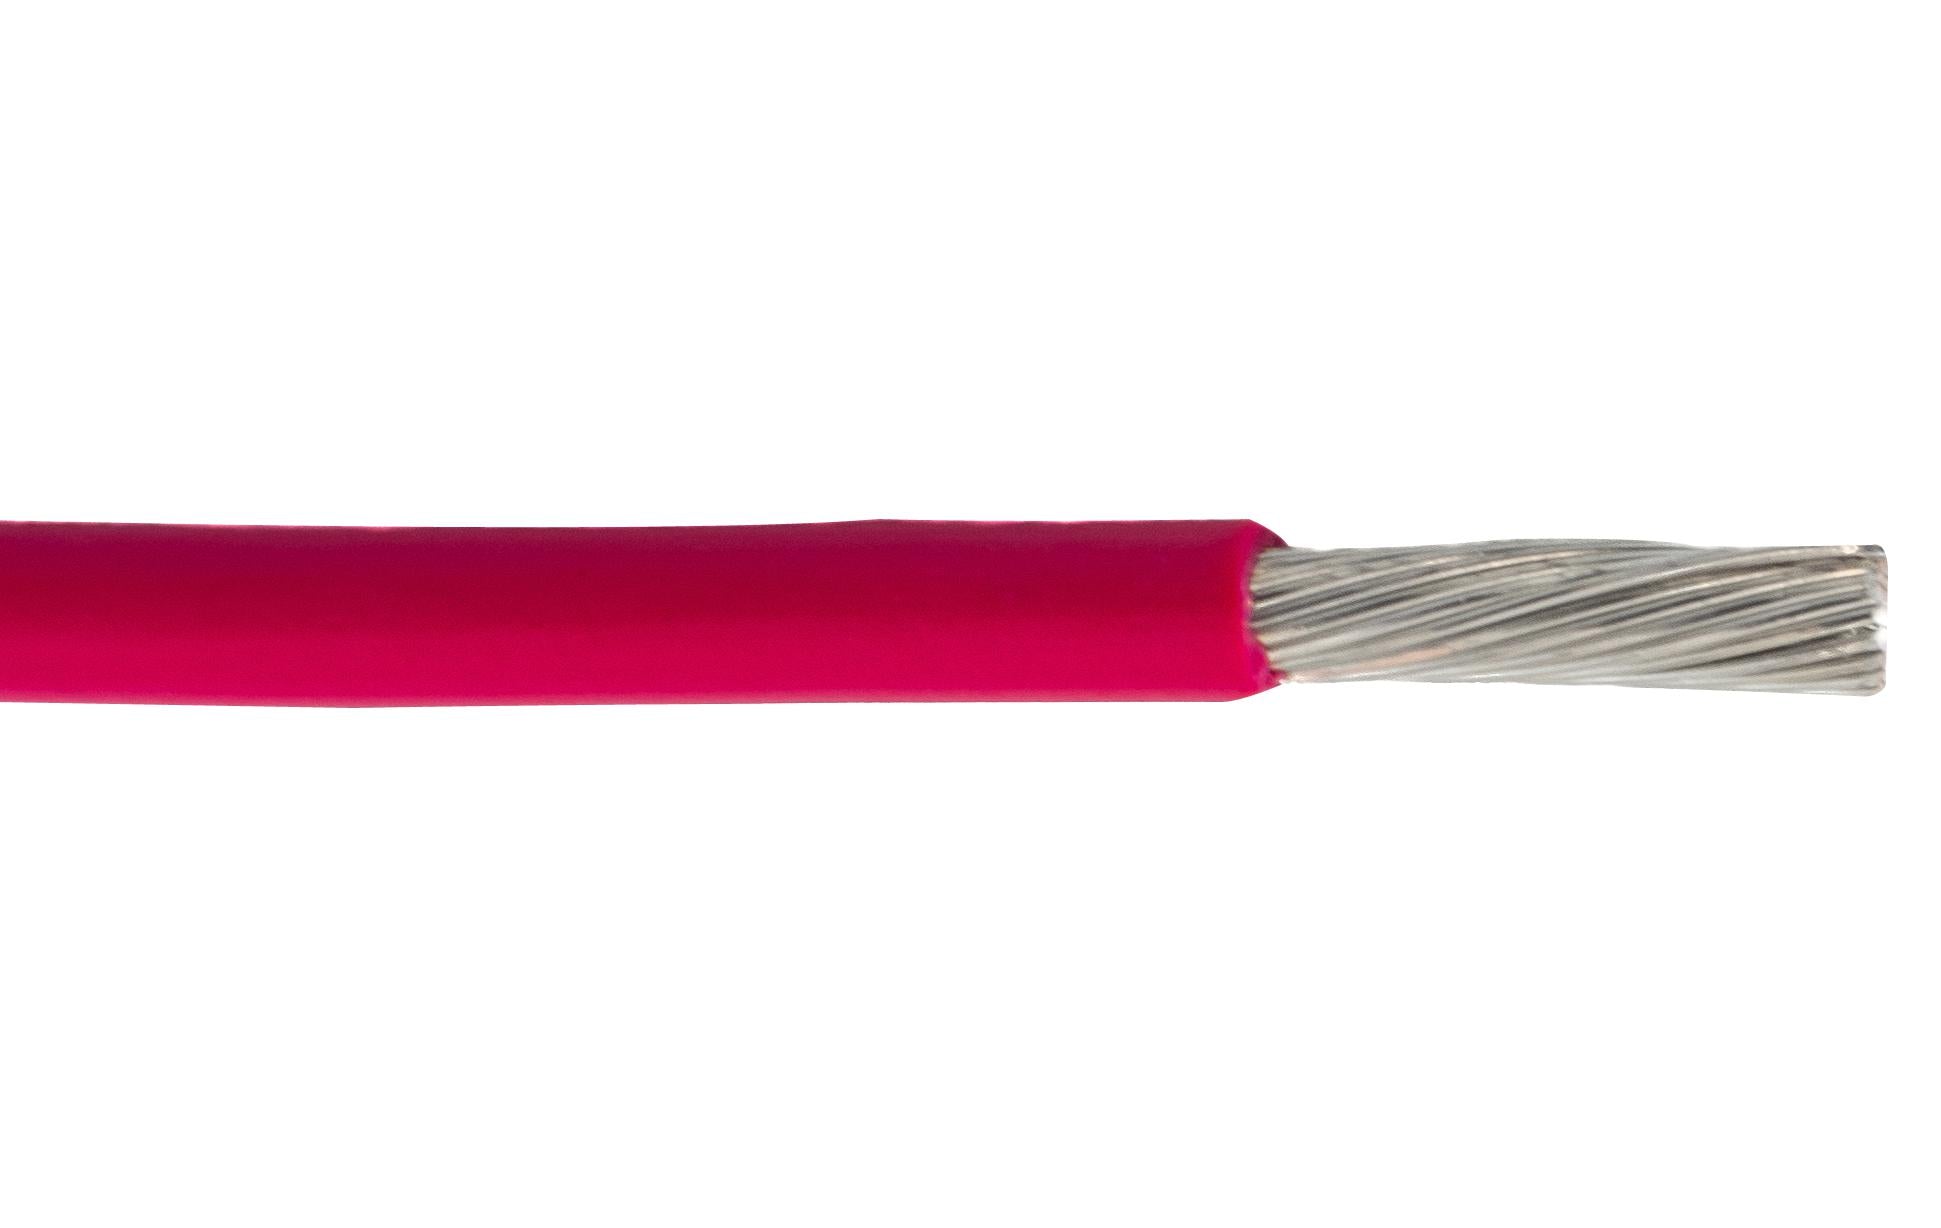 67150 RD HOOK-UP WIRE, 1.5MM2, RED, PER M ALPHA WIRE